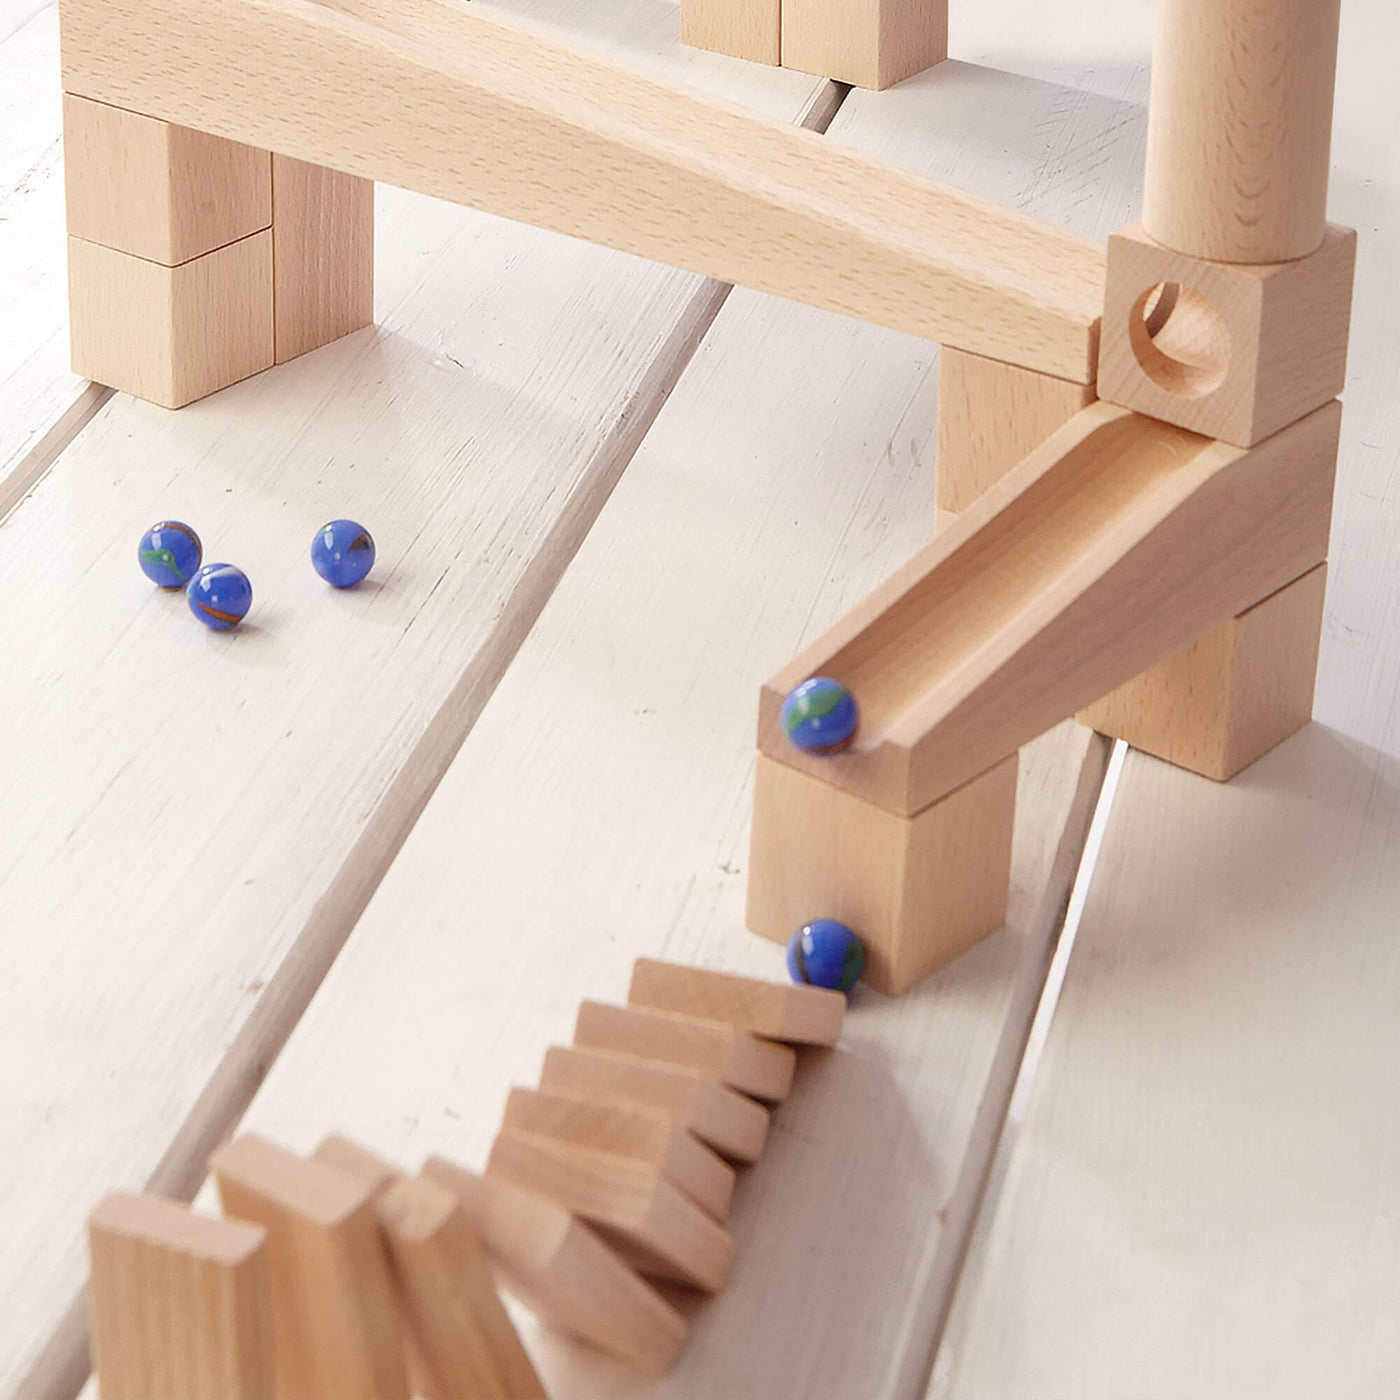 HABA Marble Run Wooden Ball Track Set with blue marbles and dominoes